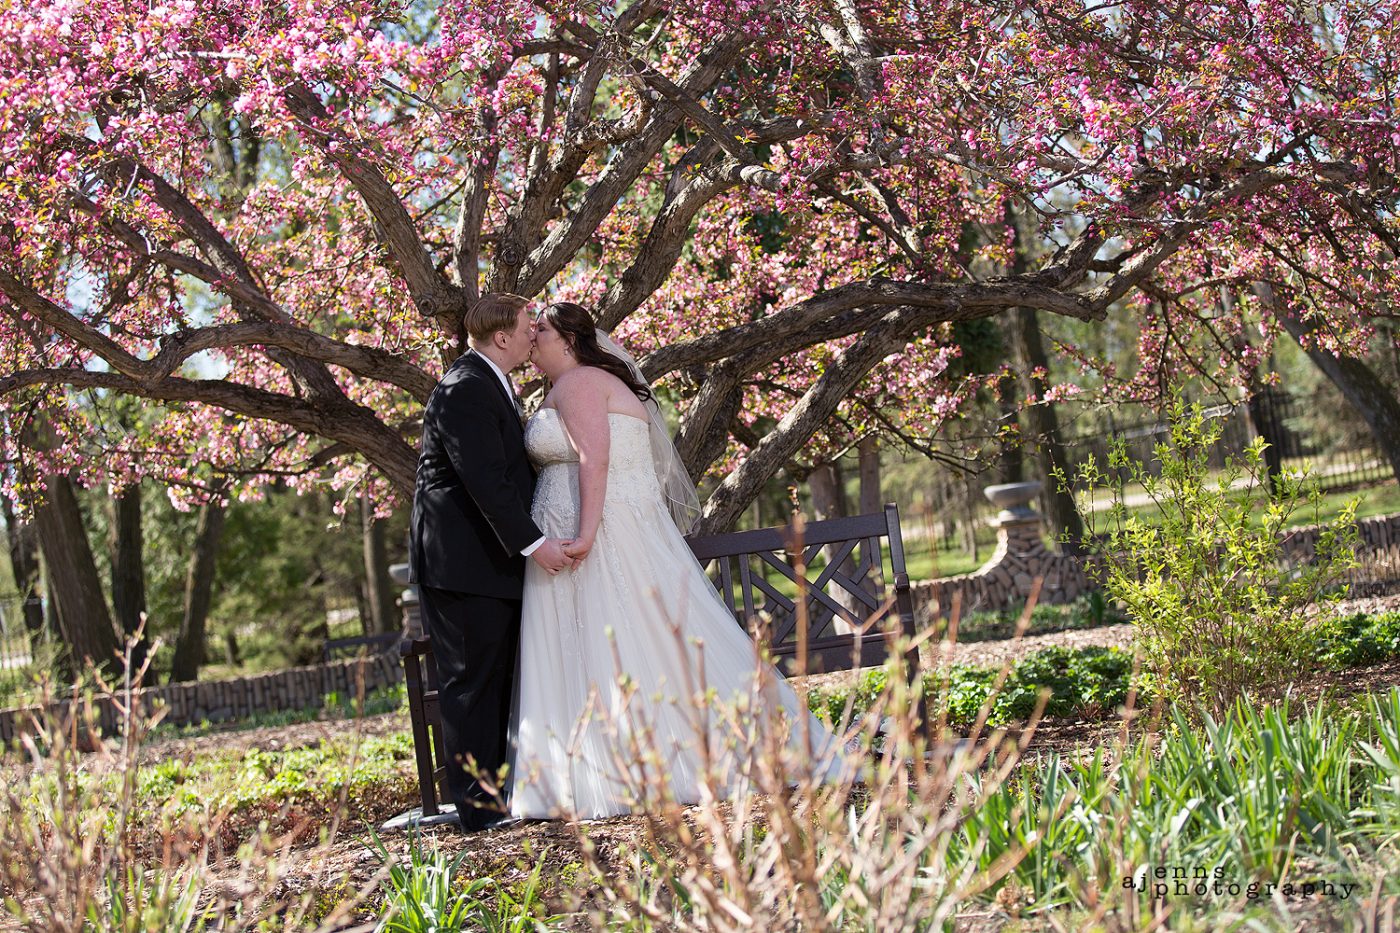 Kissing under the amazing pink tree in the English Gardens